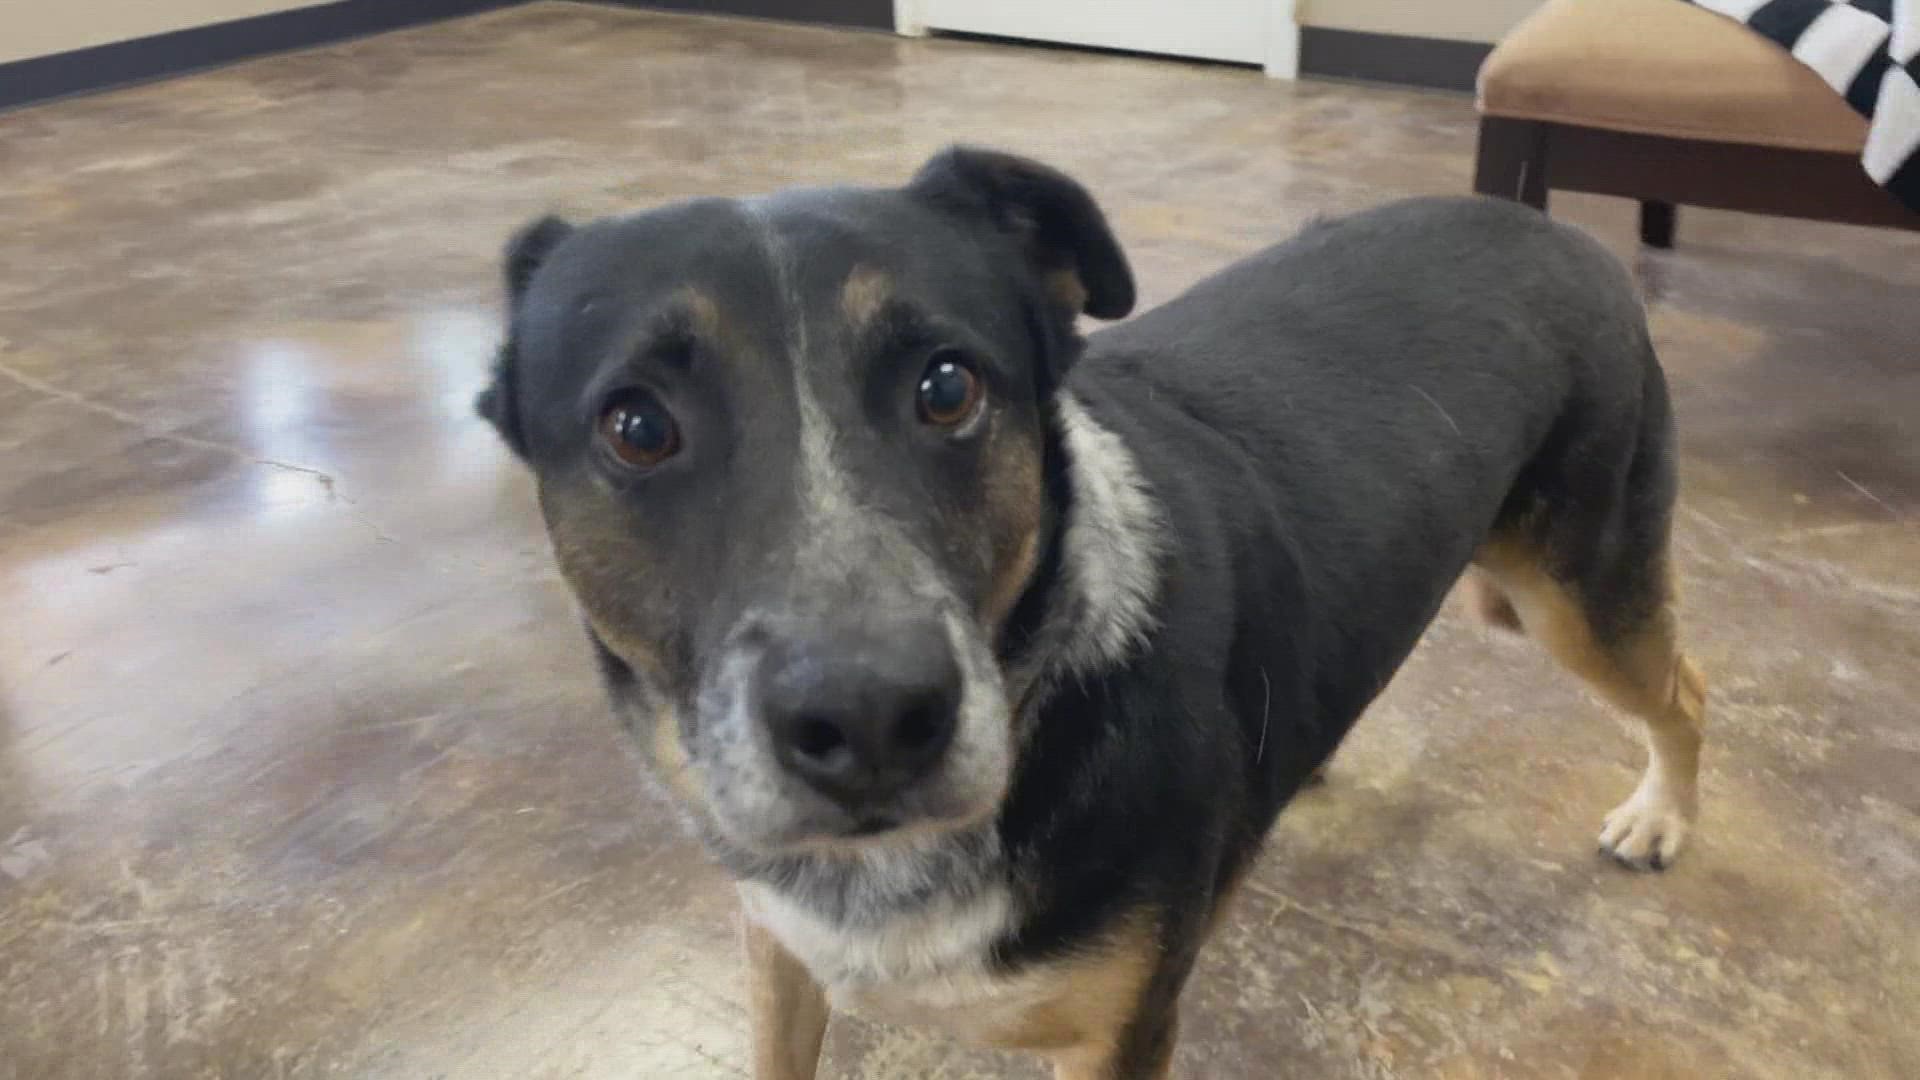 Sparky is a six-year-old Australian Shepherd cattle dog mix.